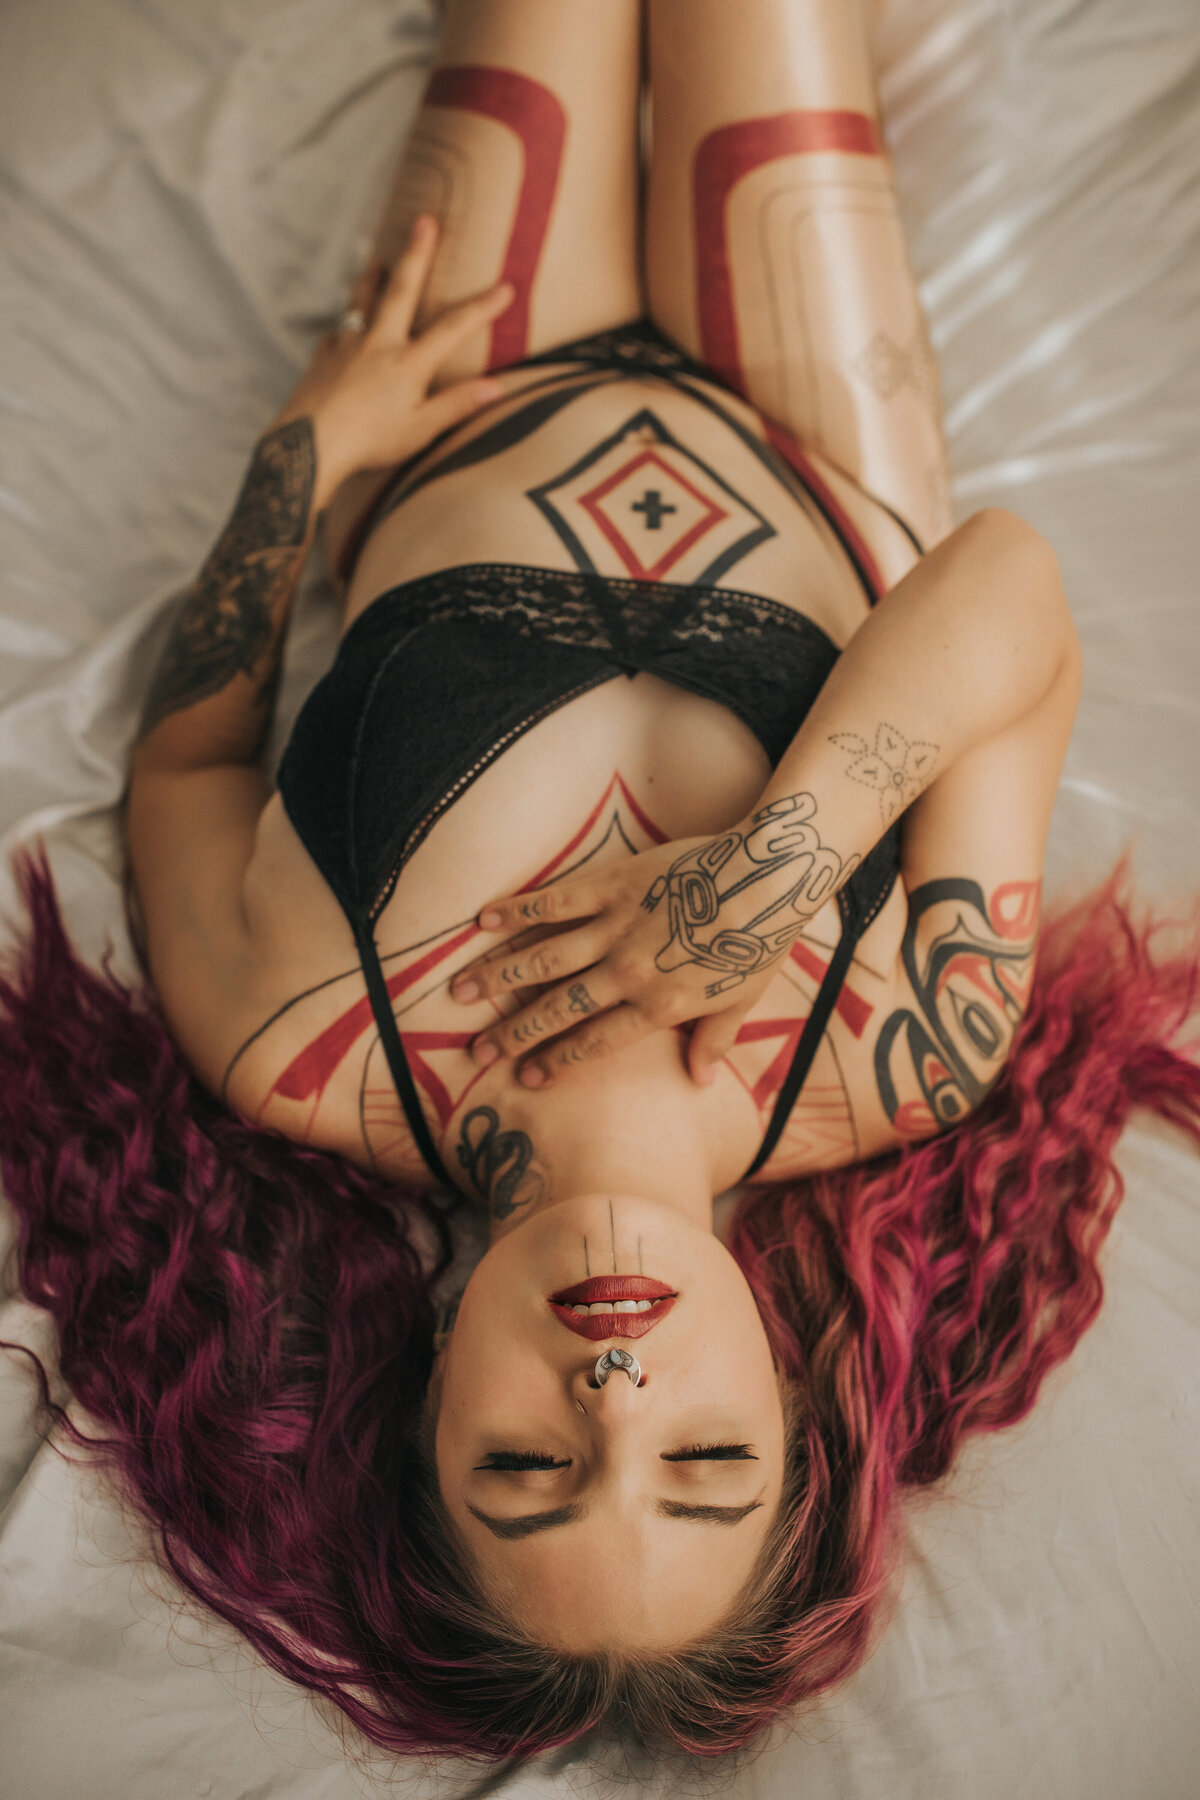 indigenous tattooed model posing on bed in boudoir photography studio